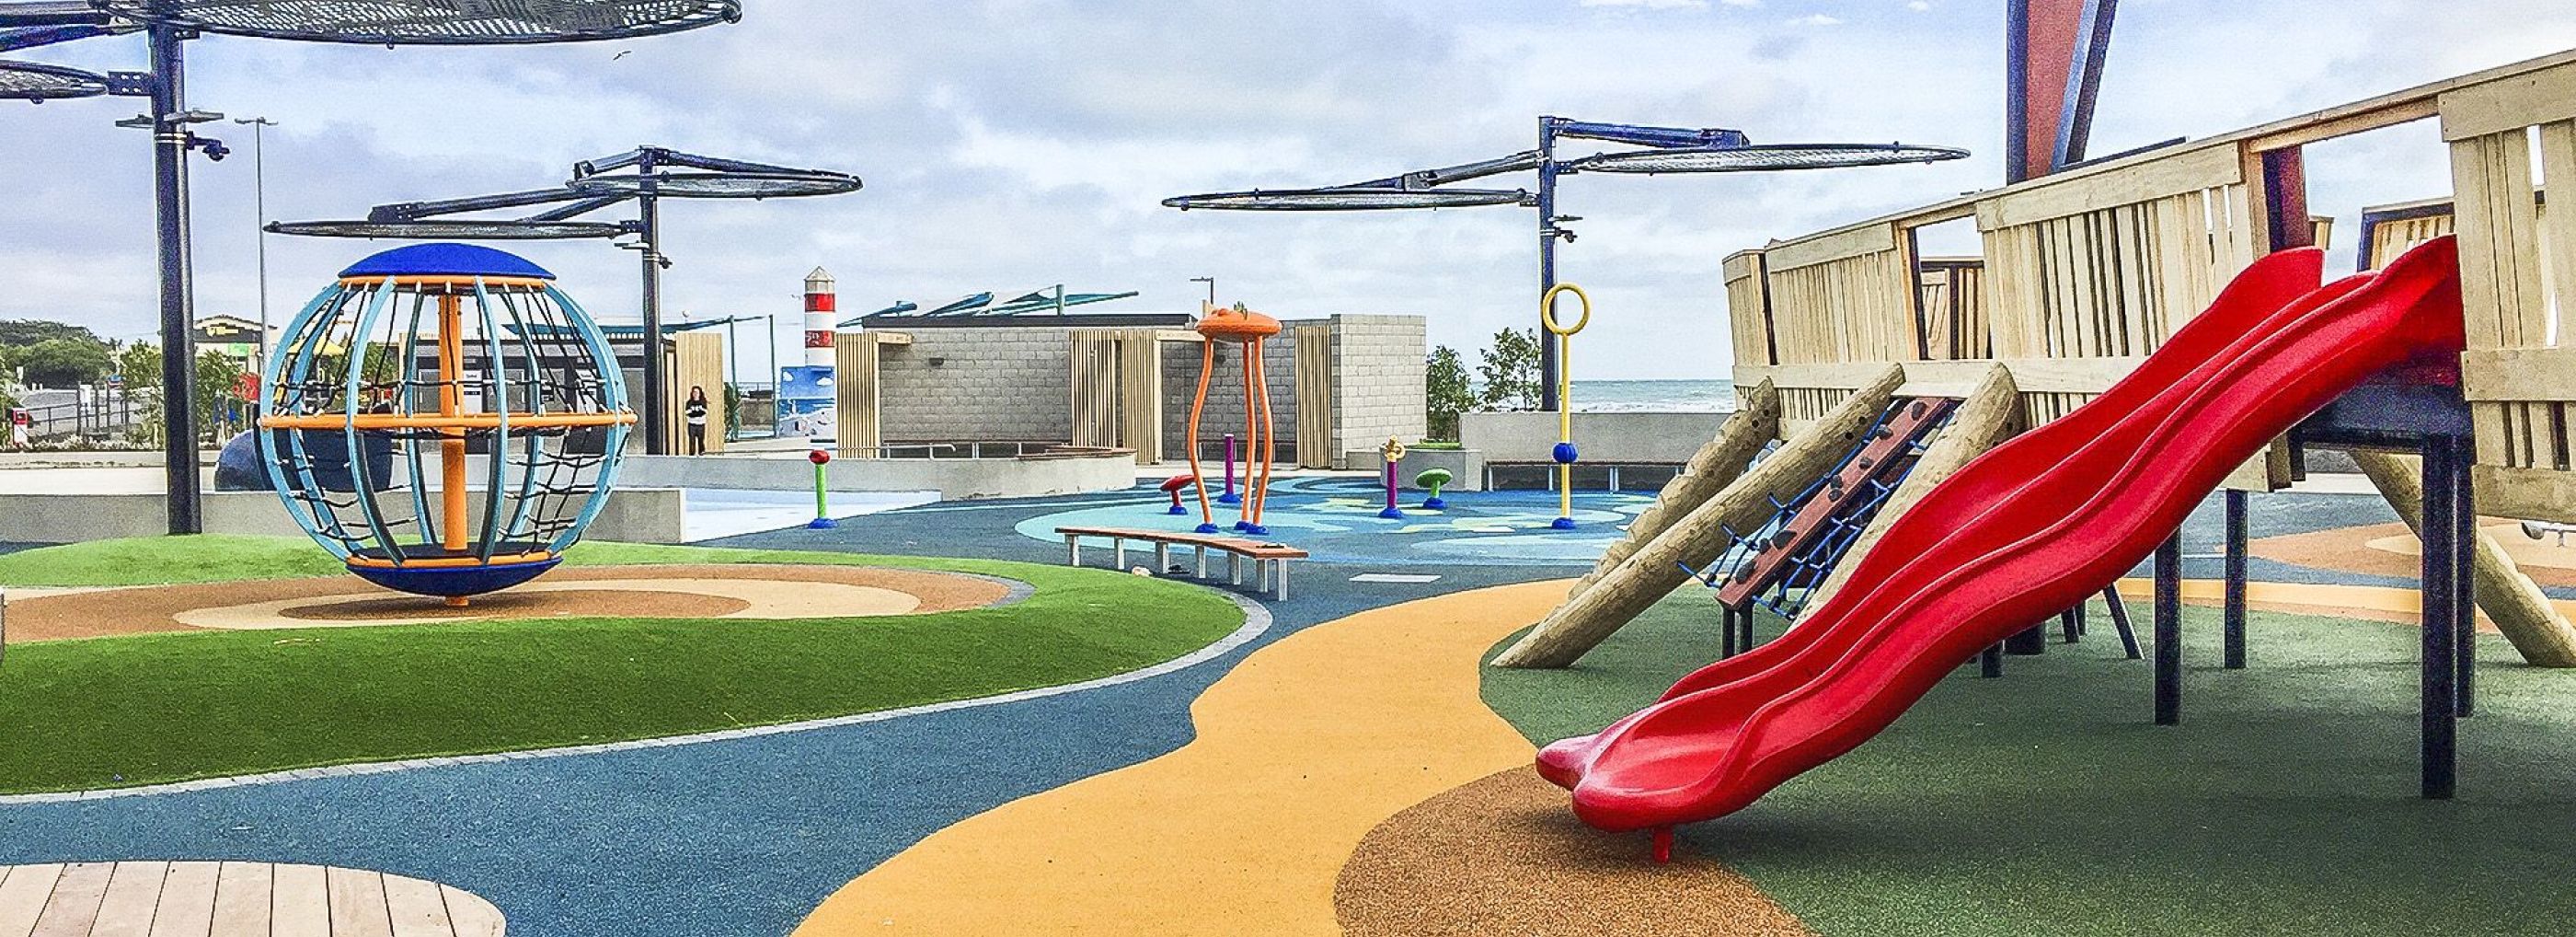 Outdoor playground with multi-coloured rubber flooring.